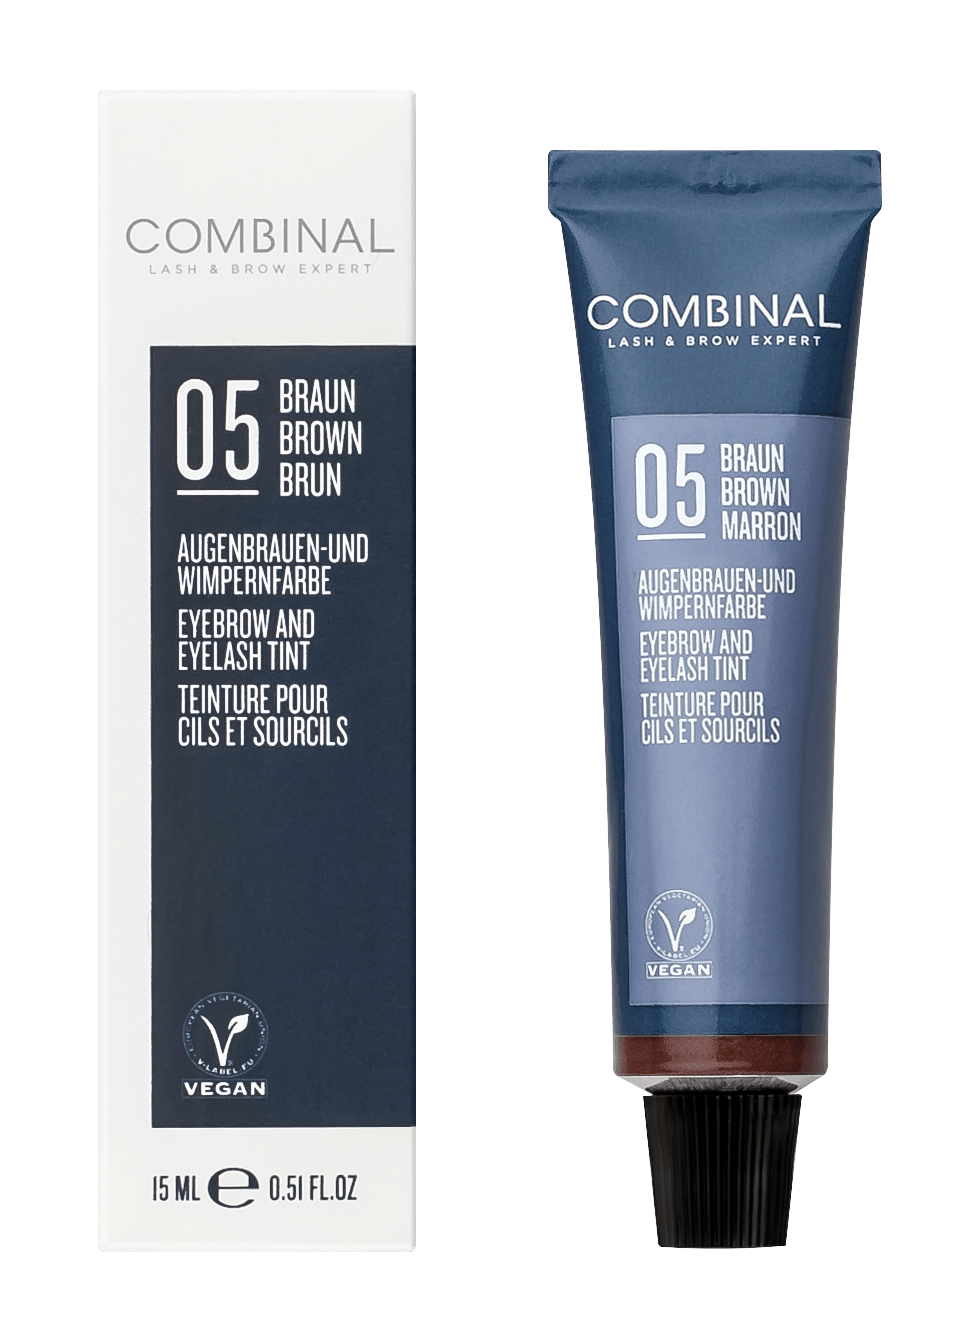 COMBINAL - Wimpernfarbe, 15 ml in braun